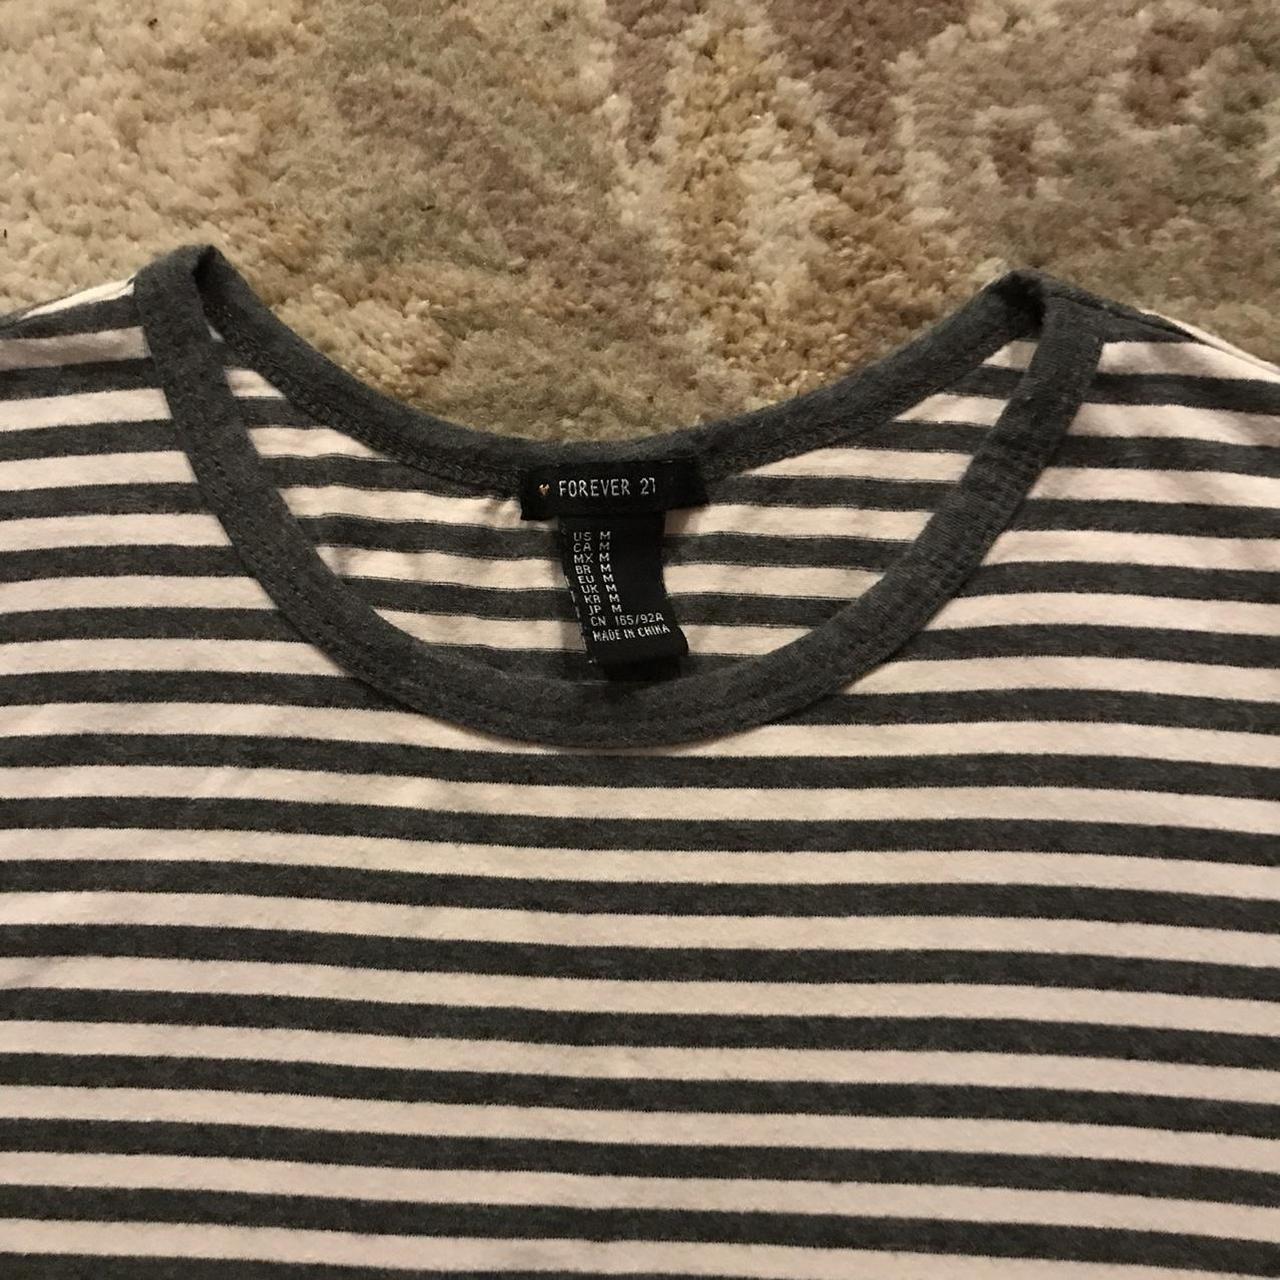 Product Image 2 - Vintage Aesthetic Striped Top
Brand New